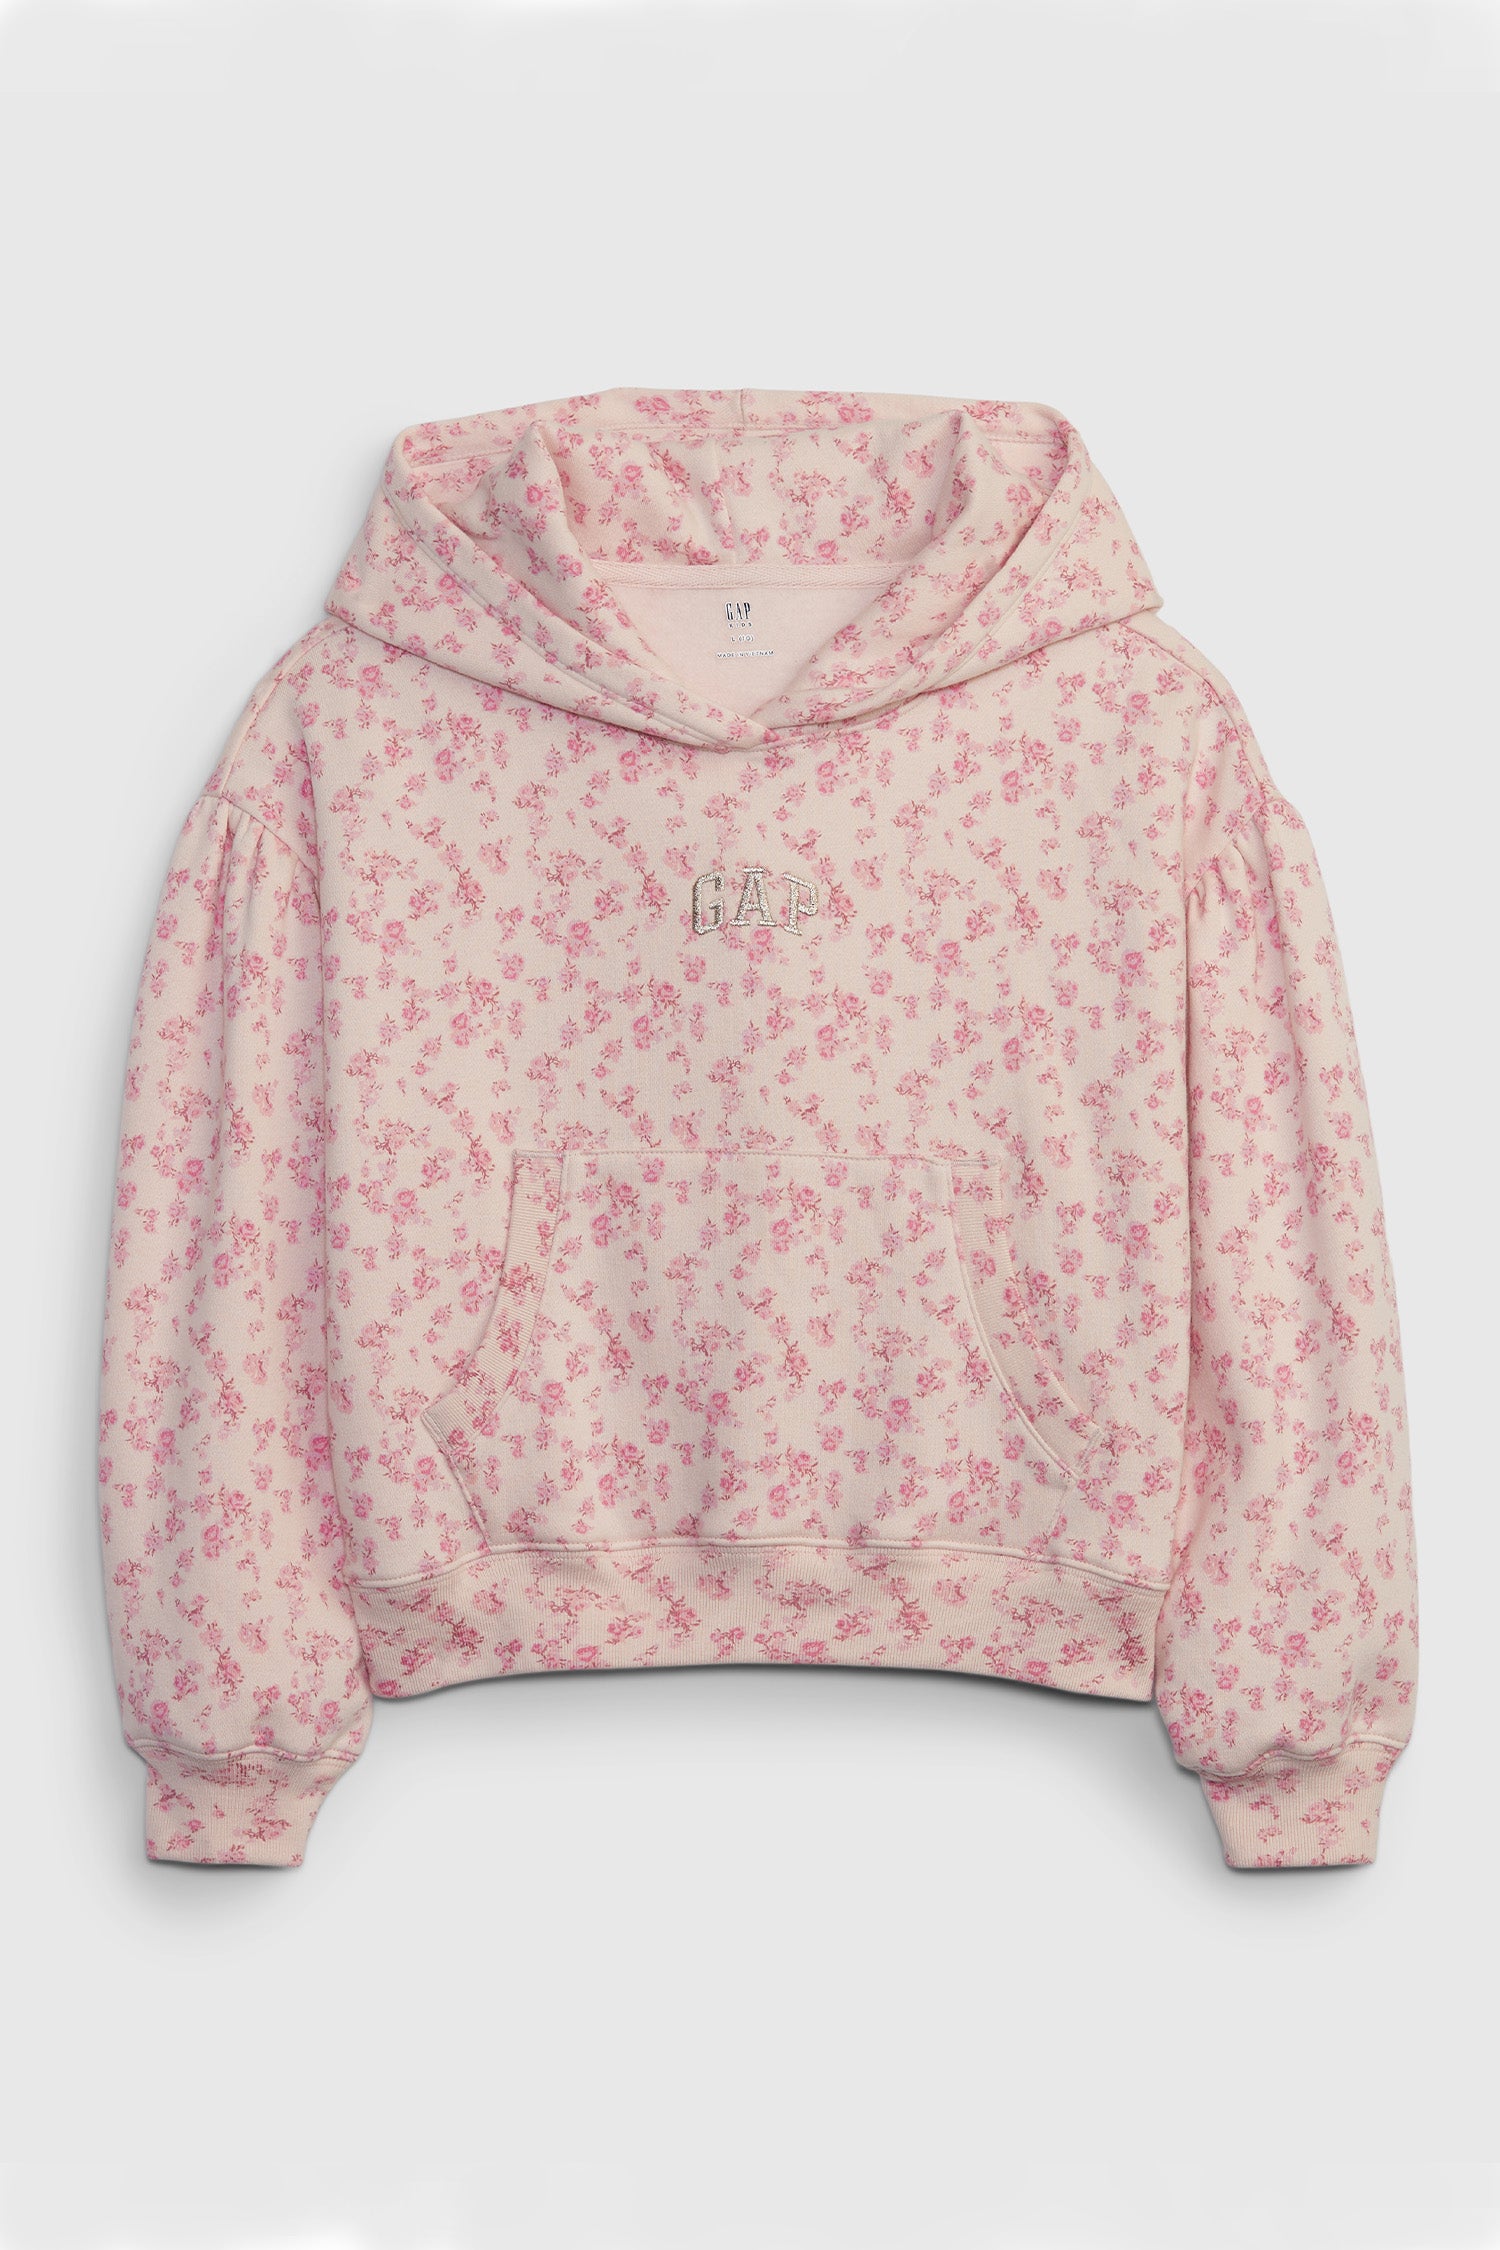 Kids pink floral crop hoodie with GAP arch logo on chest and front pocket